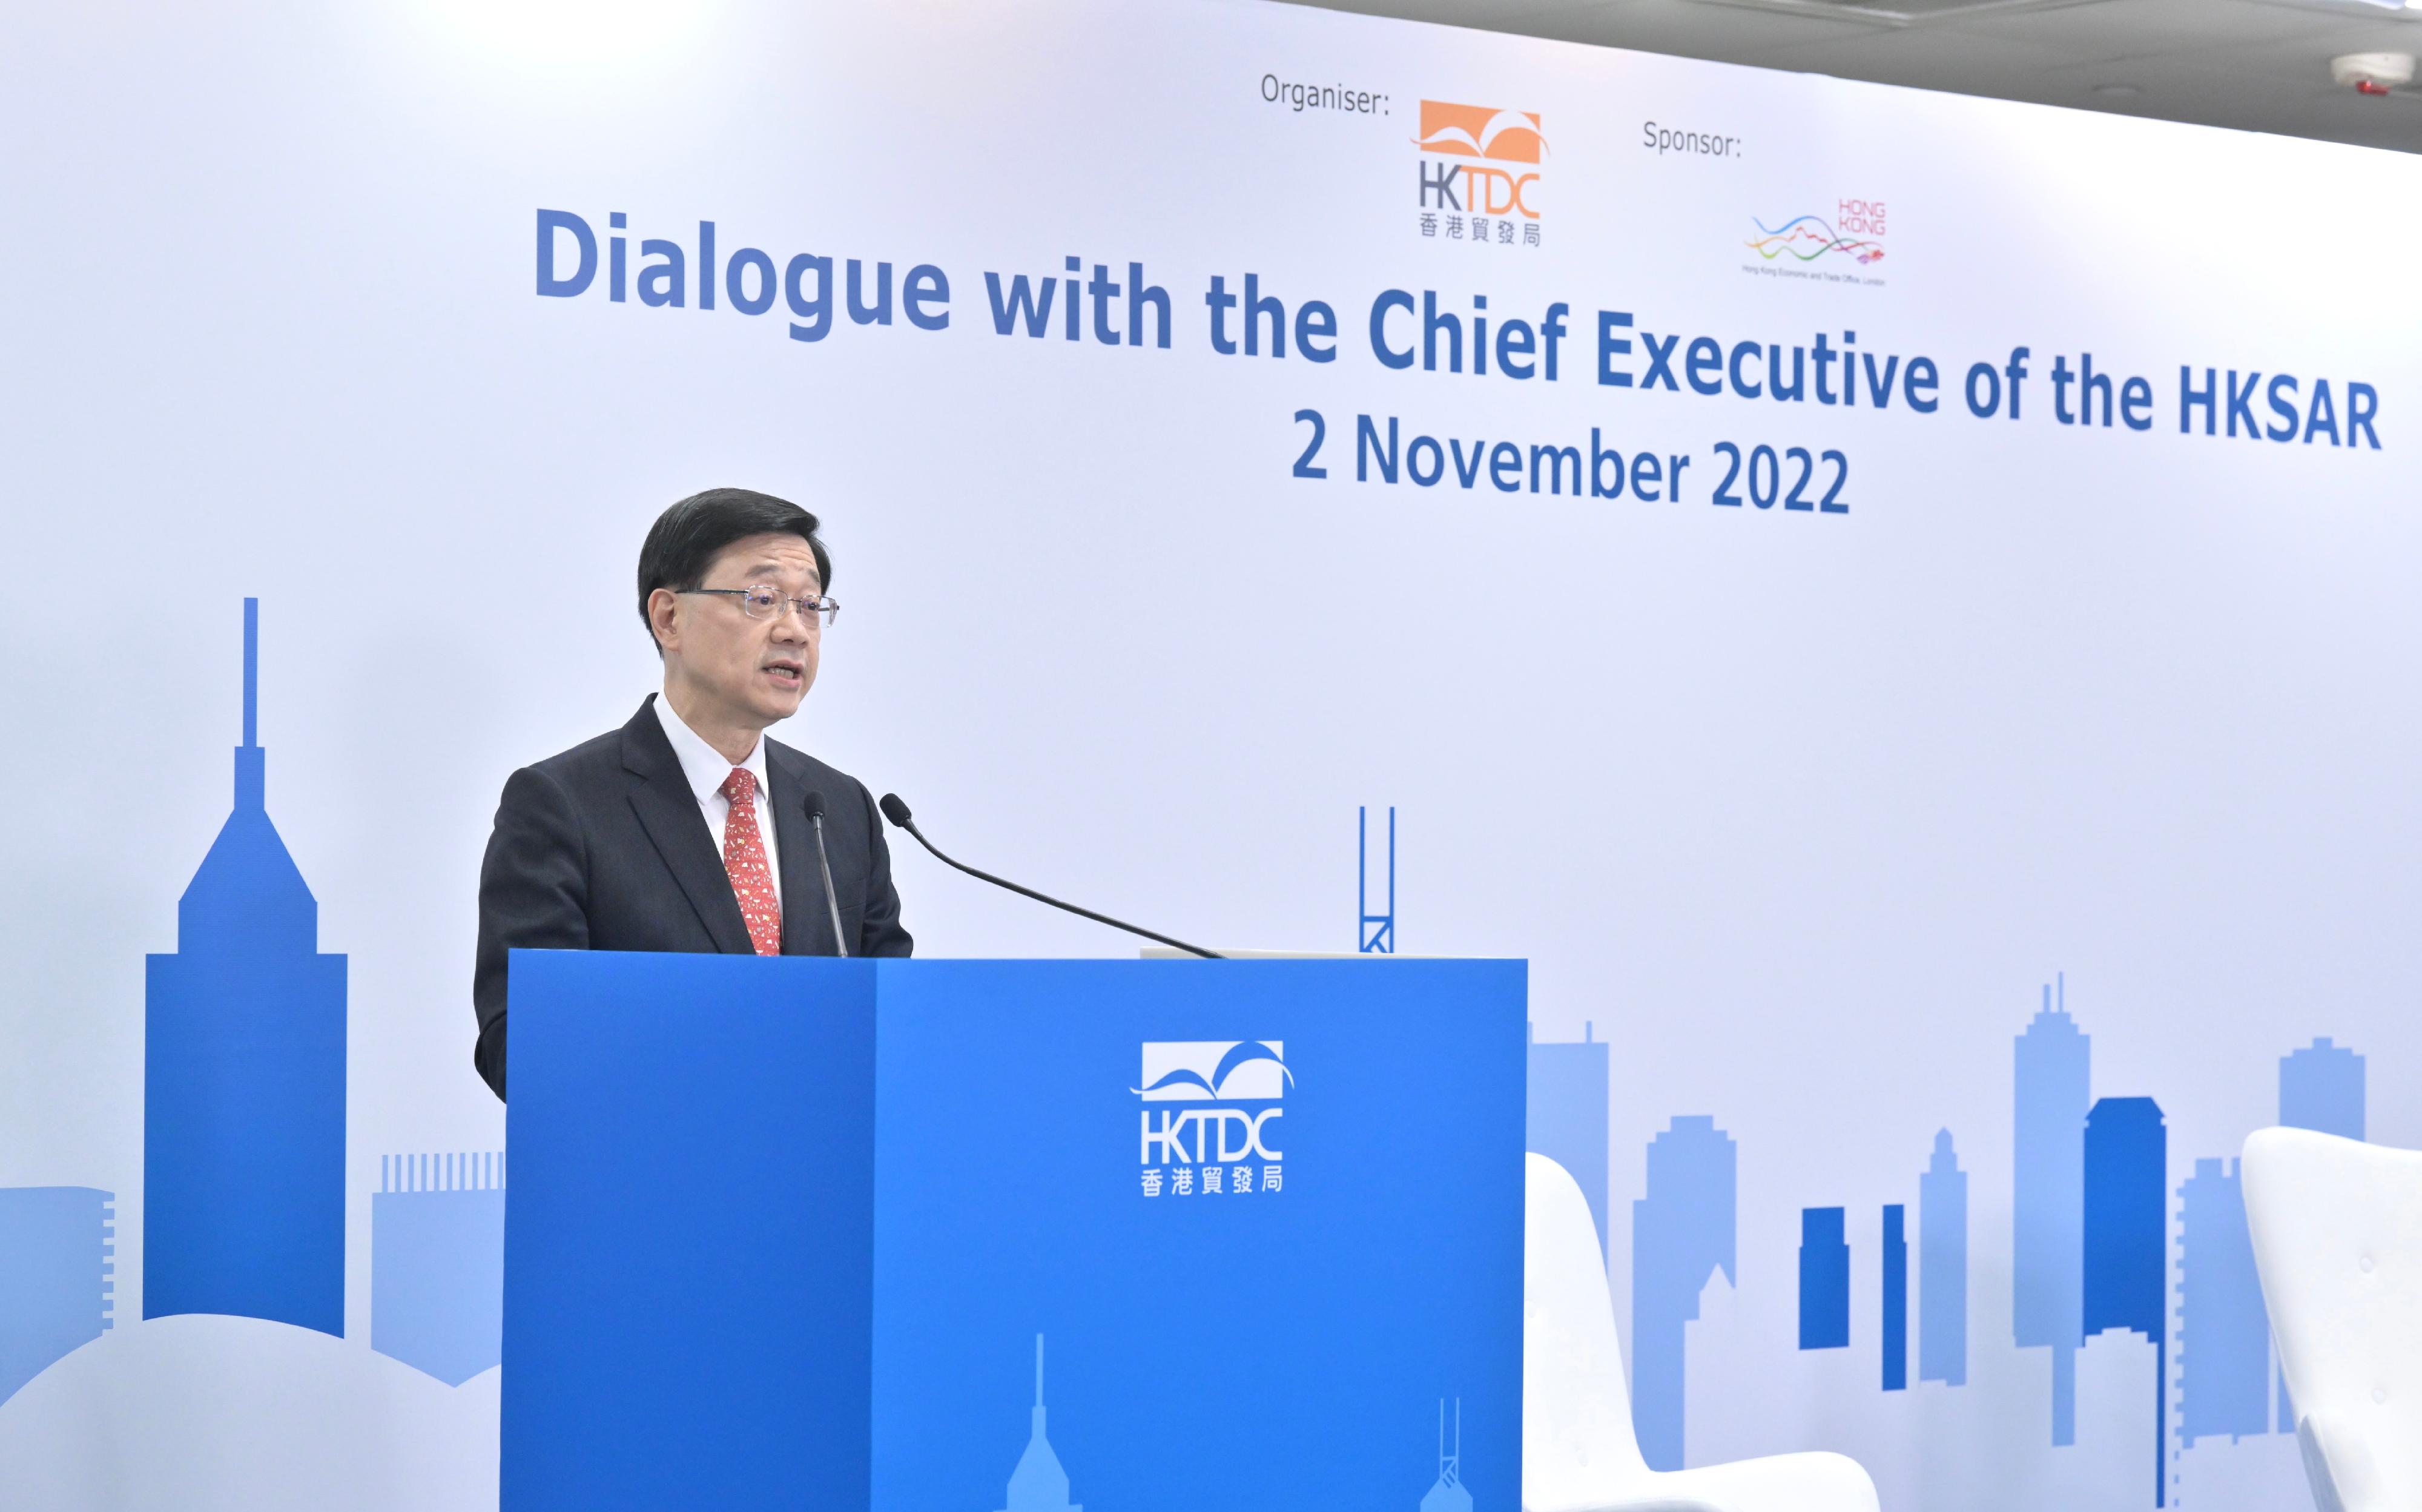 The Chief Executive, Mr John Lee, speaks at the "Dialogue with the Chief Executive of the HKSAR" webinar organised by the Hong Kong Trade Development Council today (November 2).